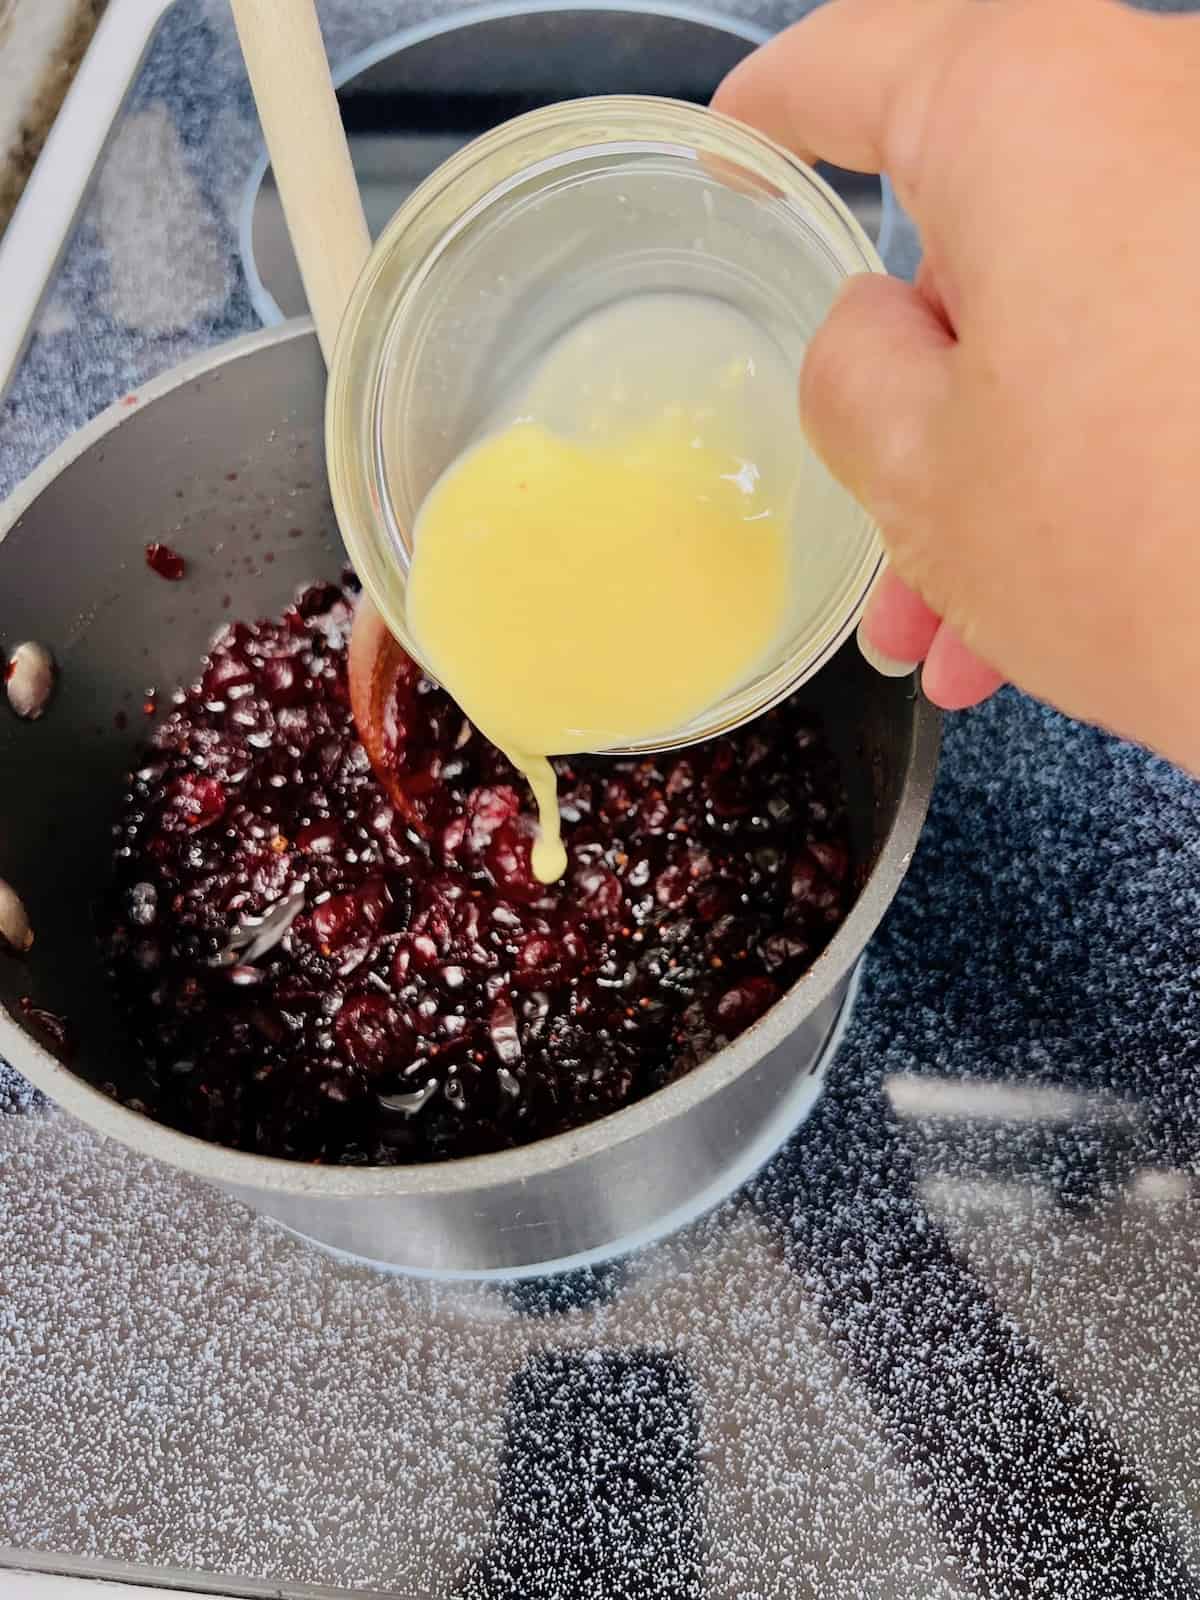 Pouring the cornstarch slurry into the cooked dried cranberries to thicken the sauce.